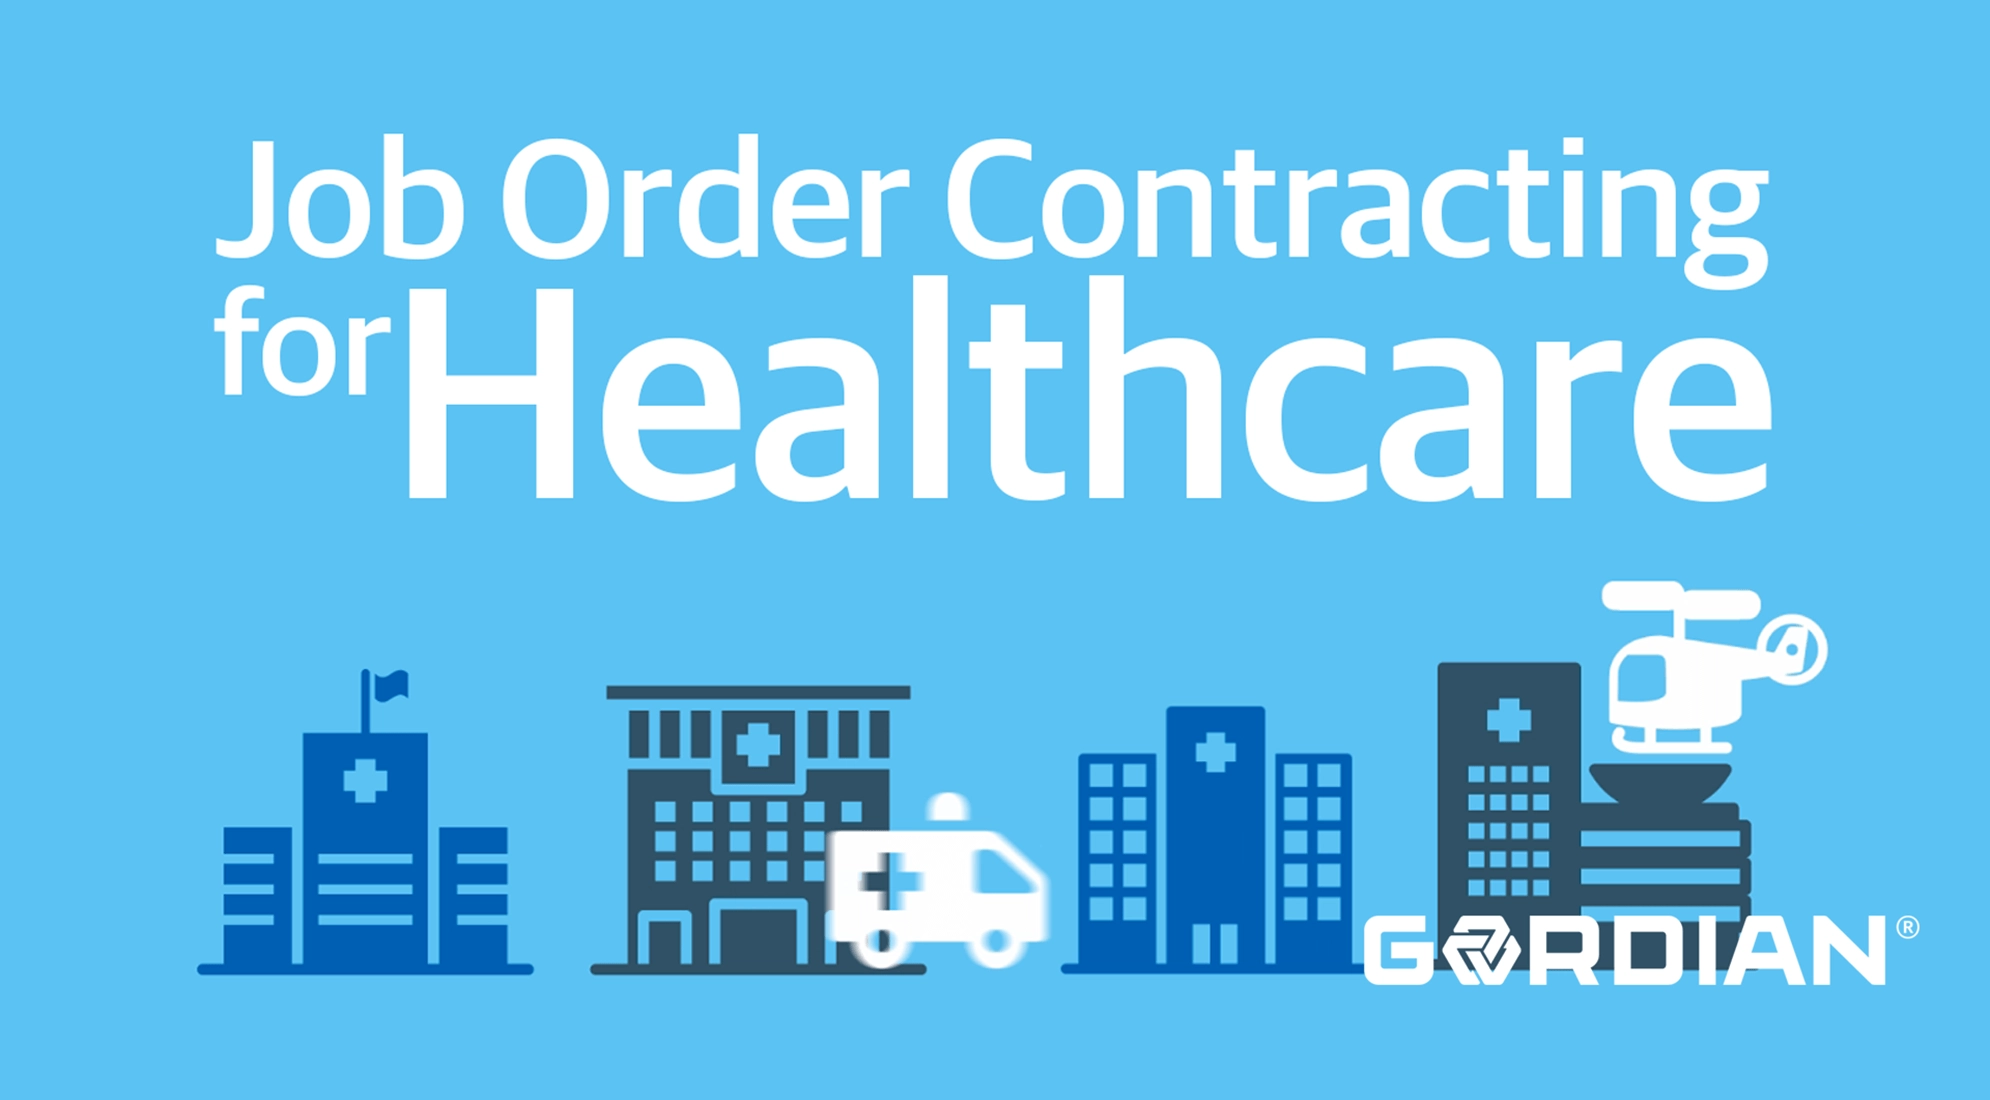 Benefits of Job Order Contracting for Healthcare 2